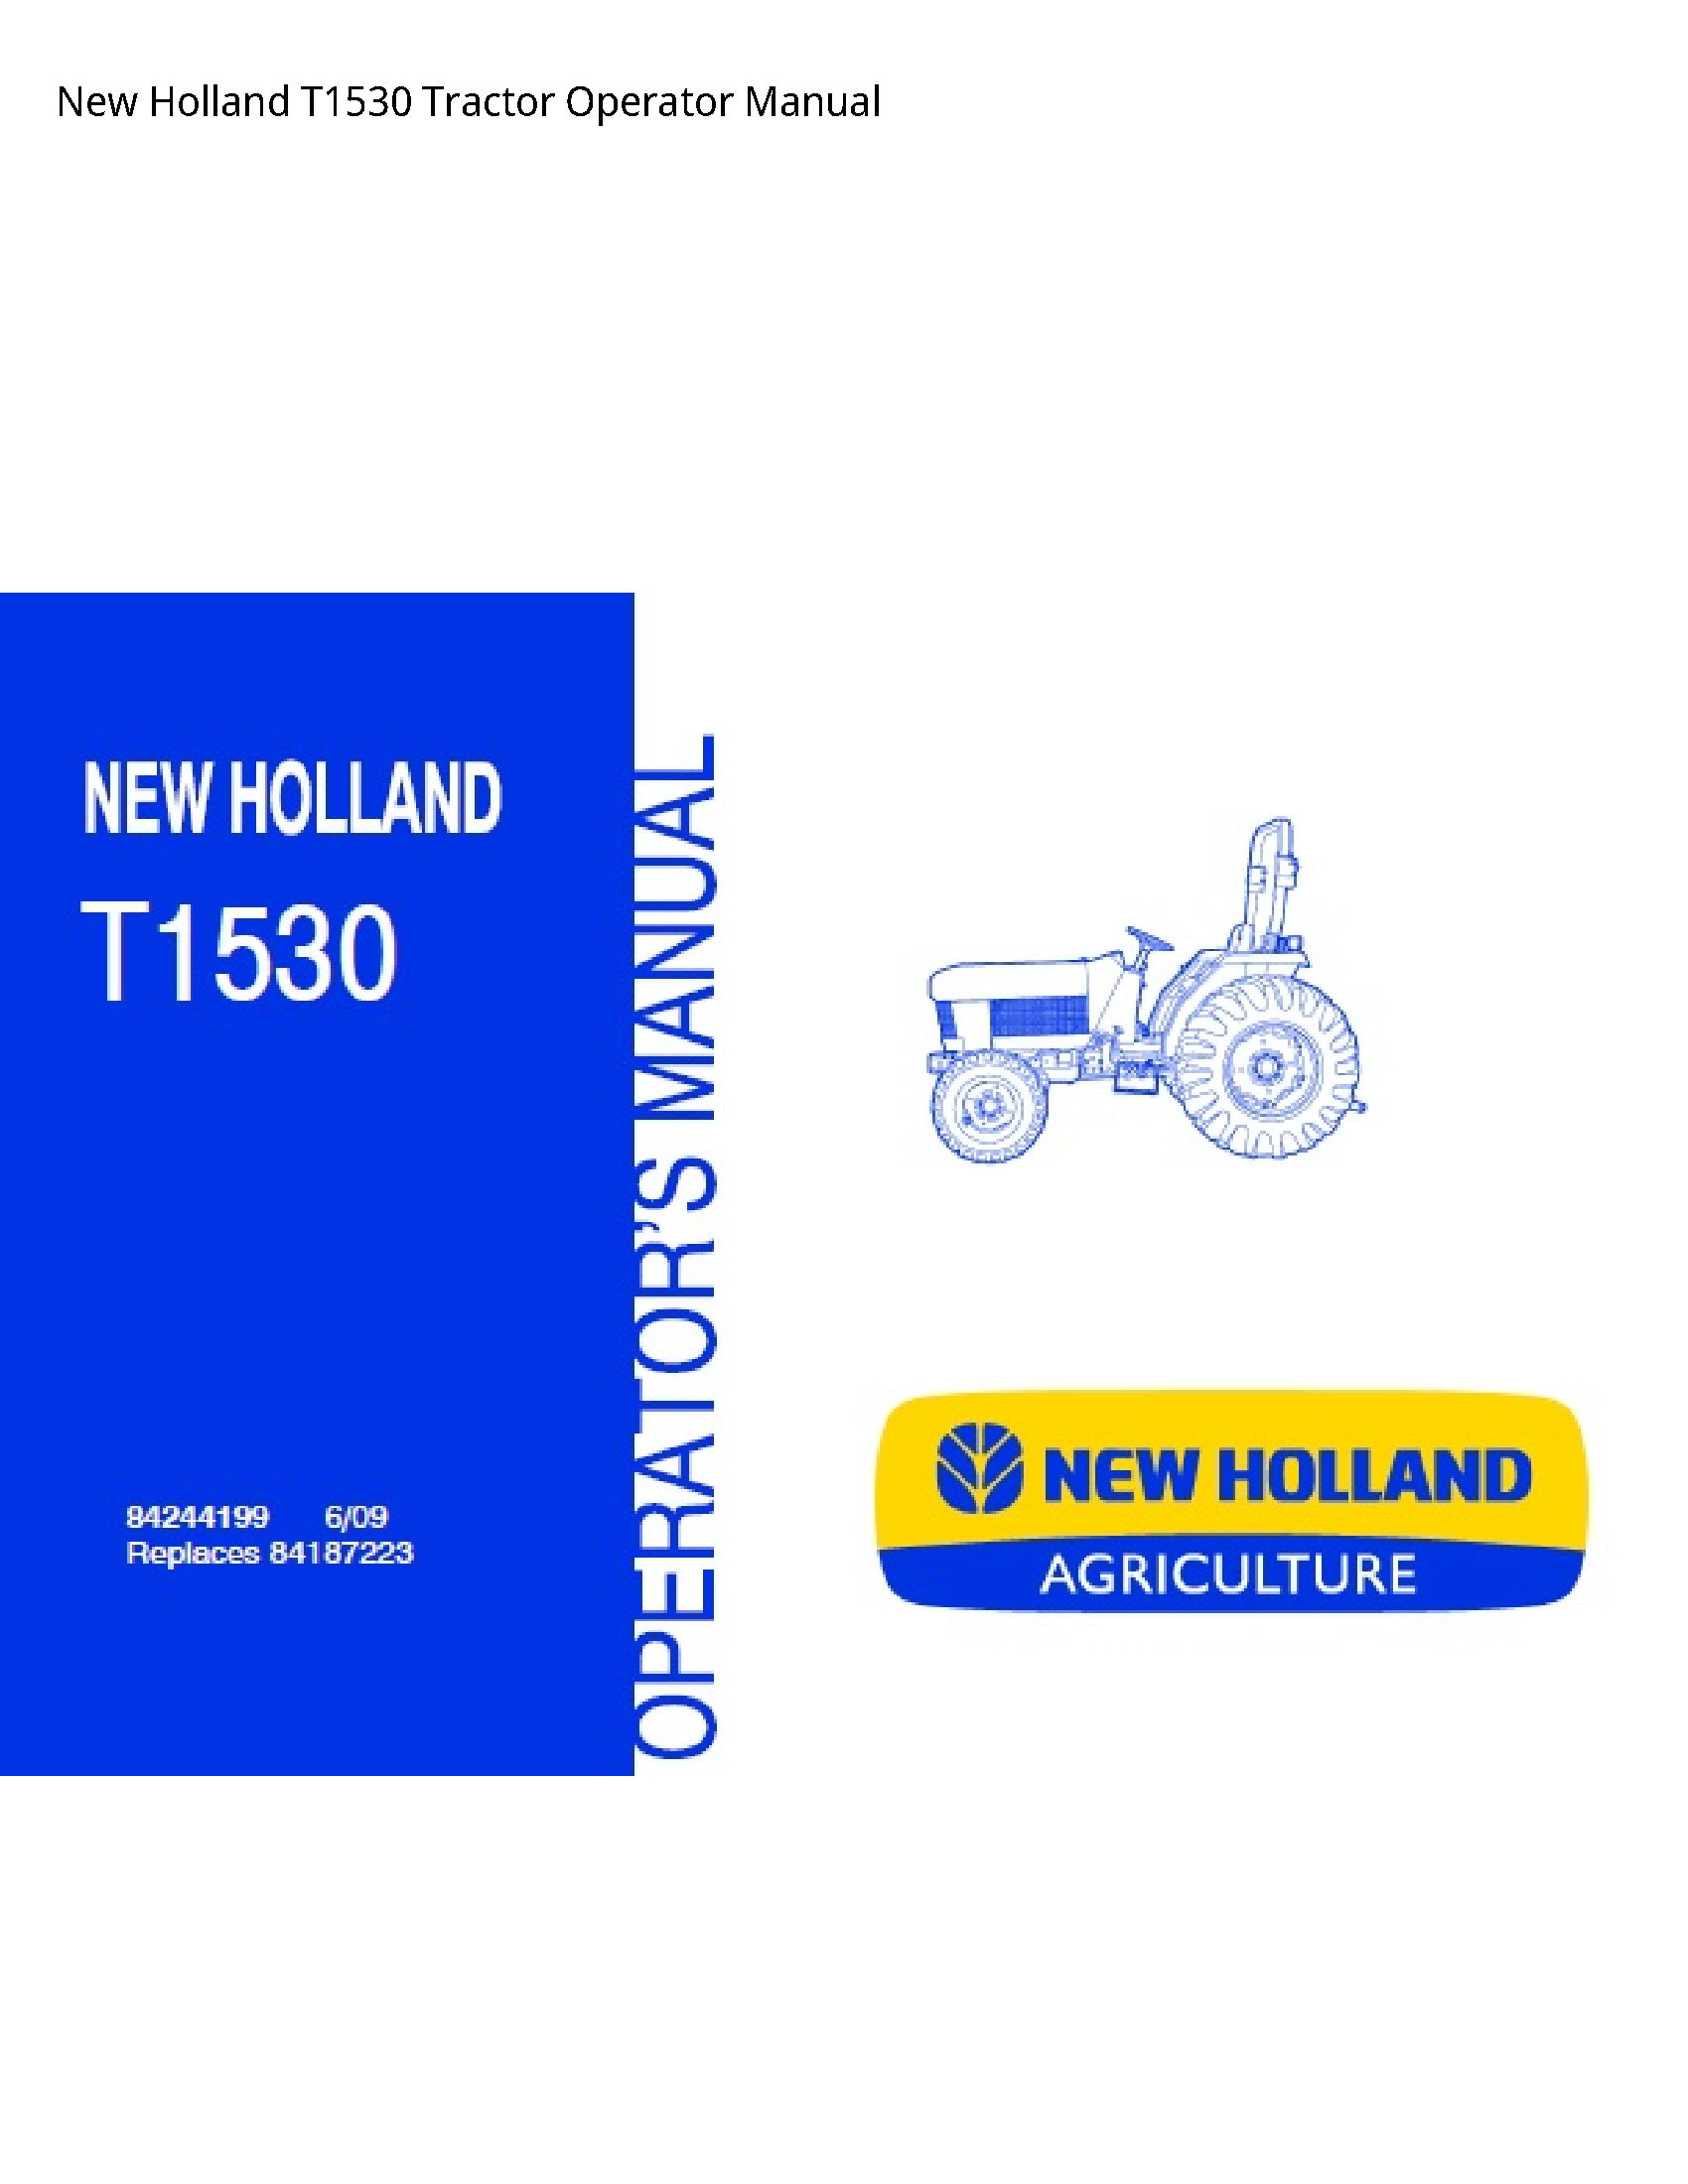 New Holland T1530 Tractor Operator manual